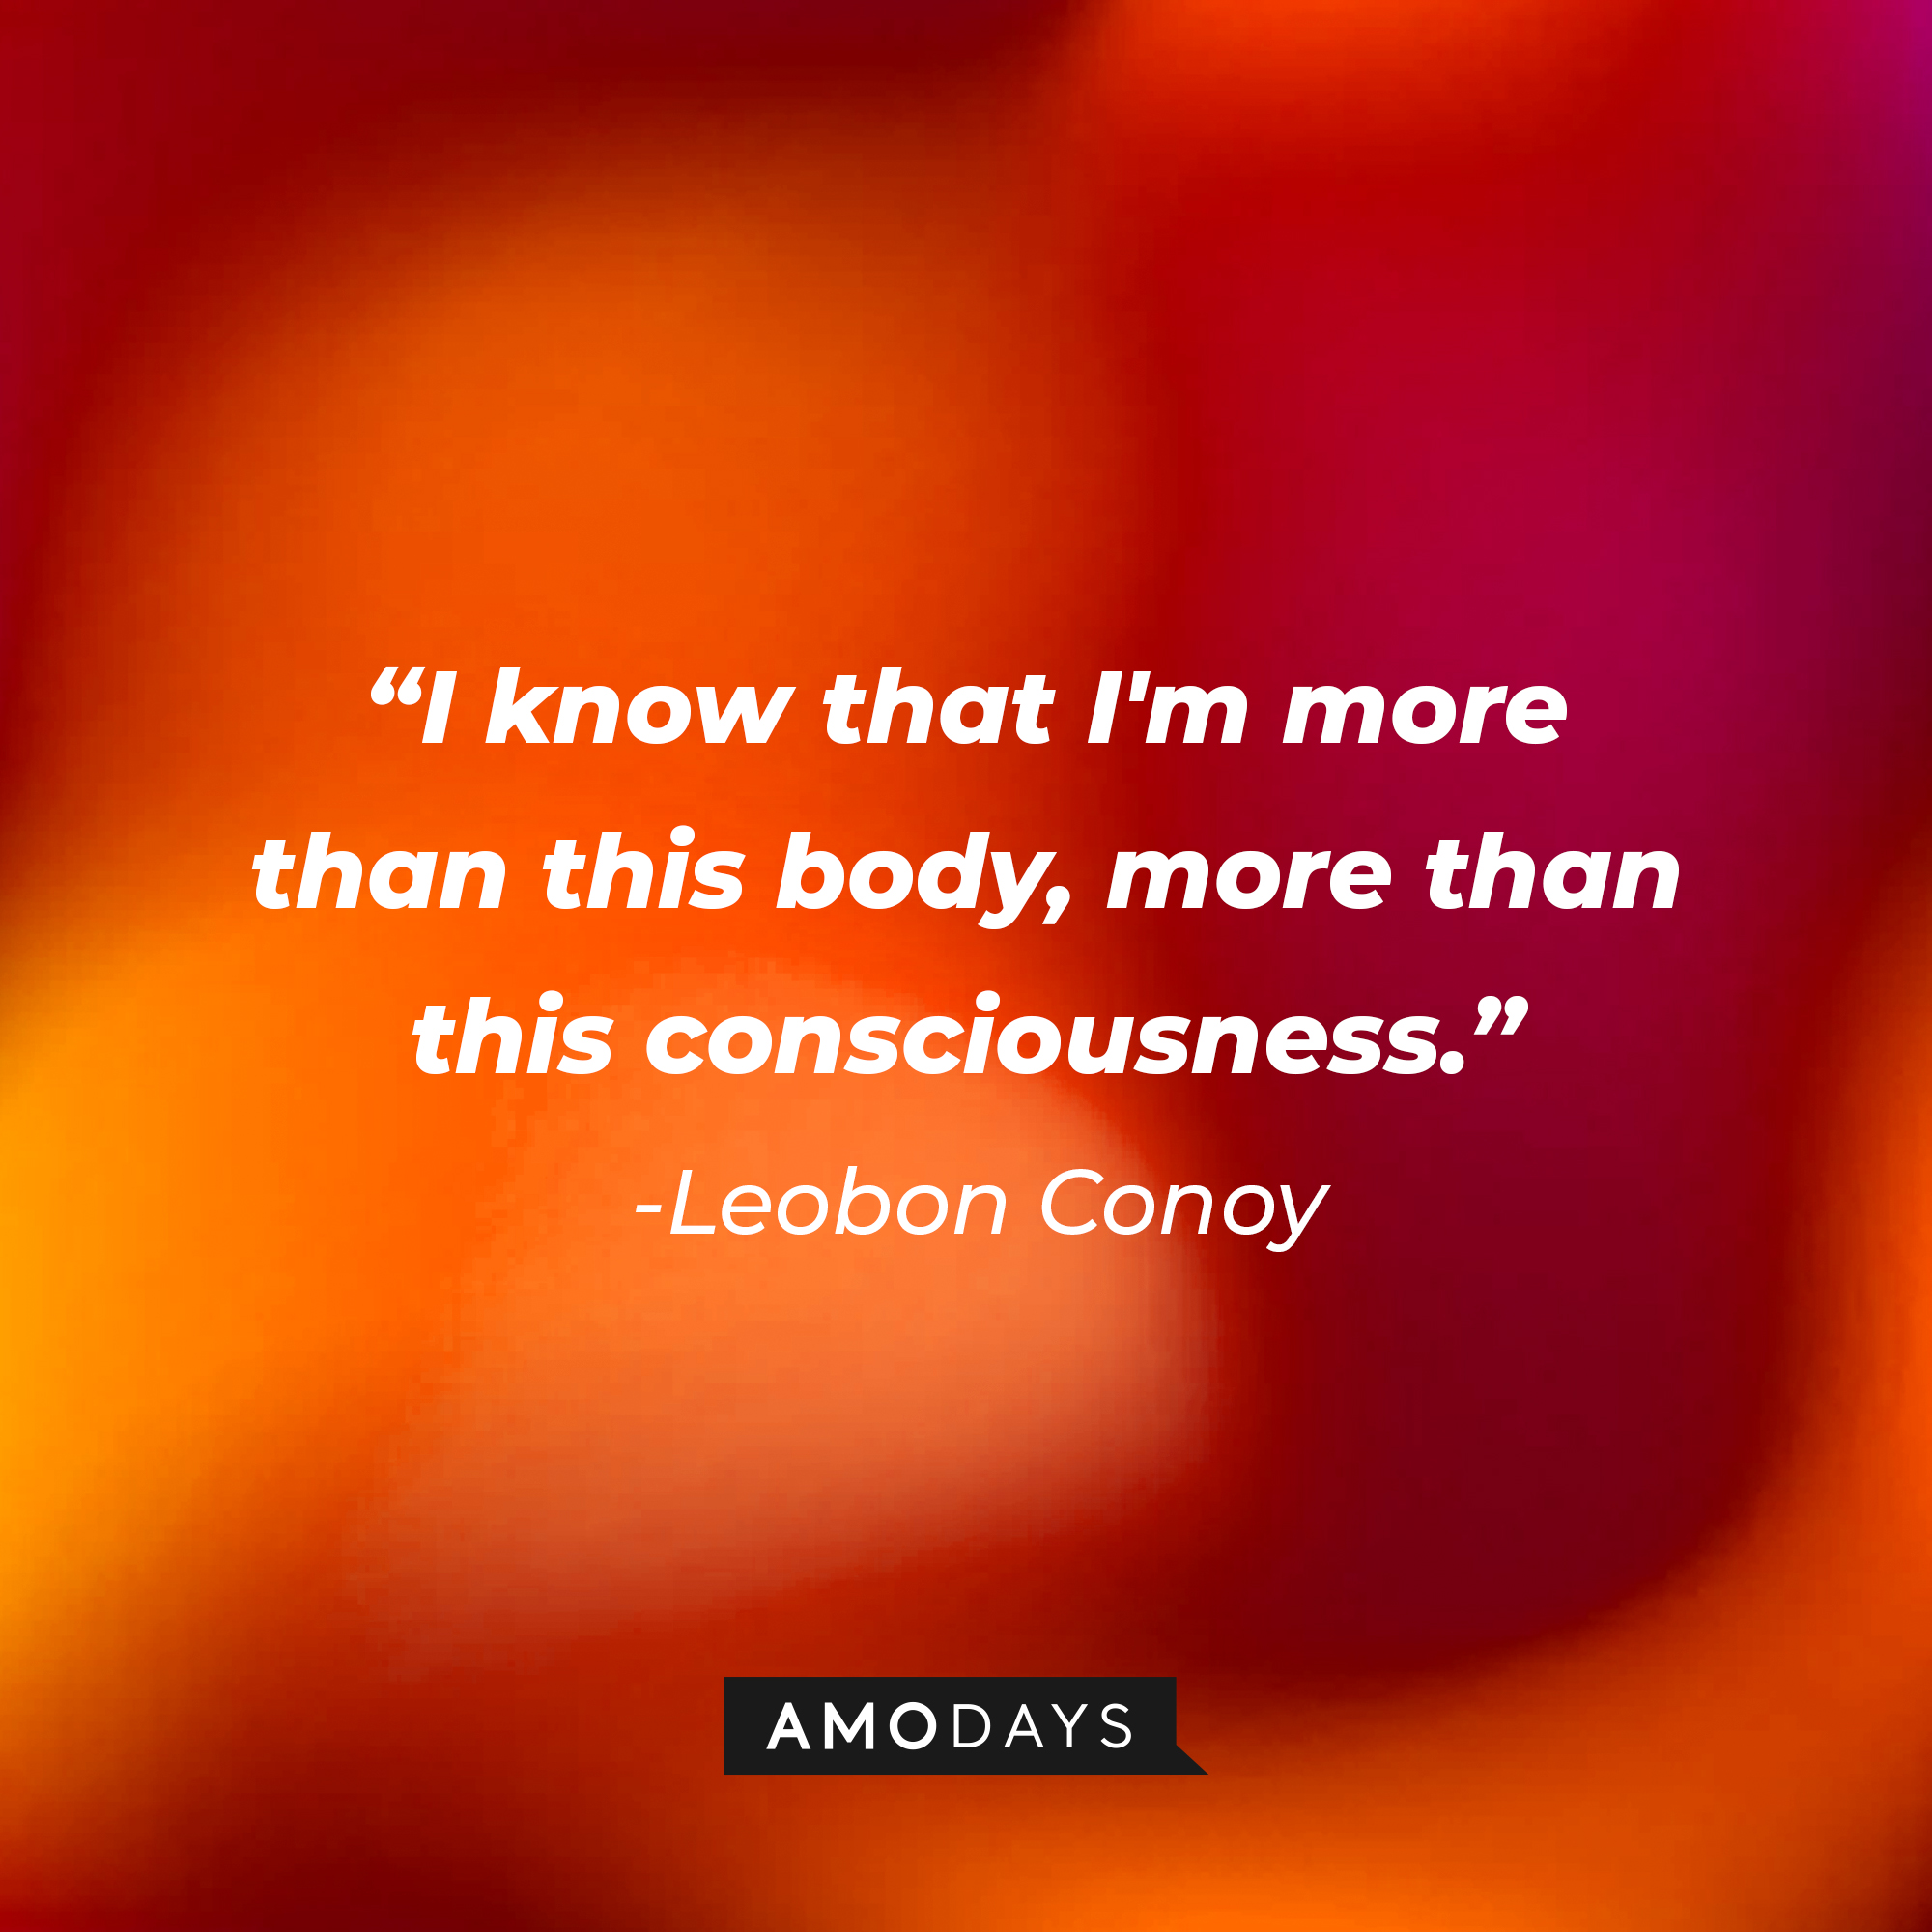 Leobon Conoy’s quote: I know that I'm more than this body, more than this consciousness.” | Source: AmoDays